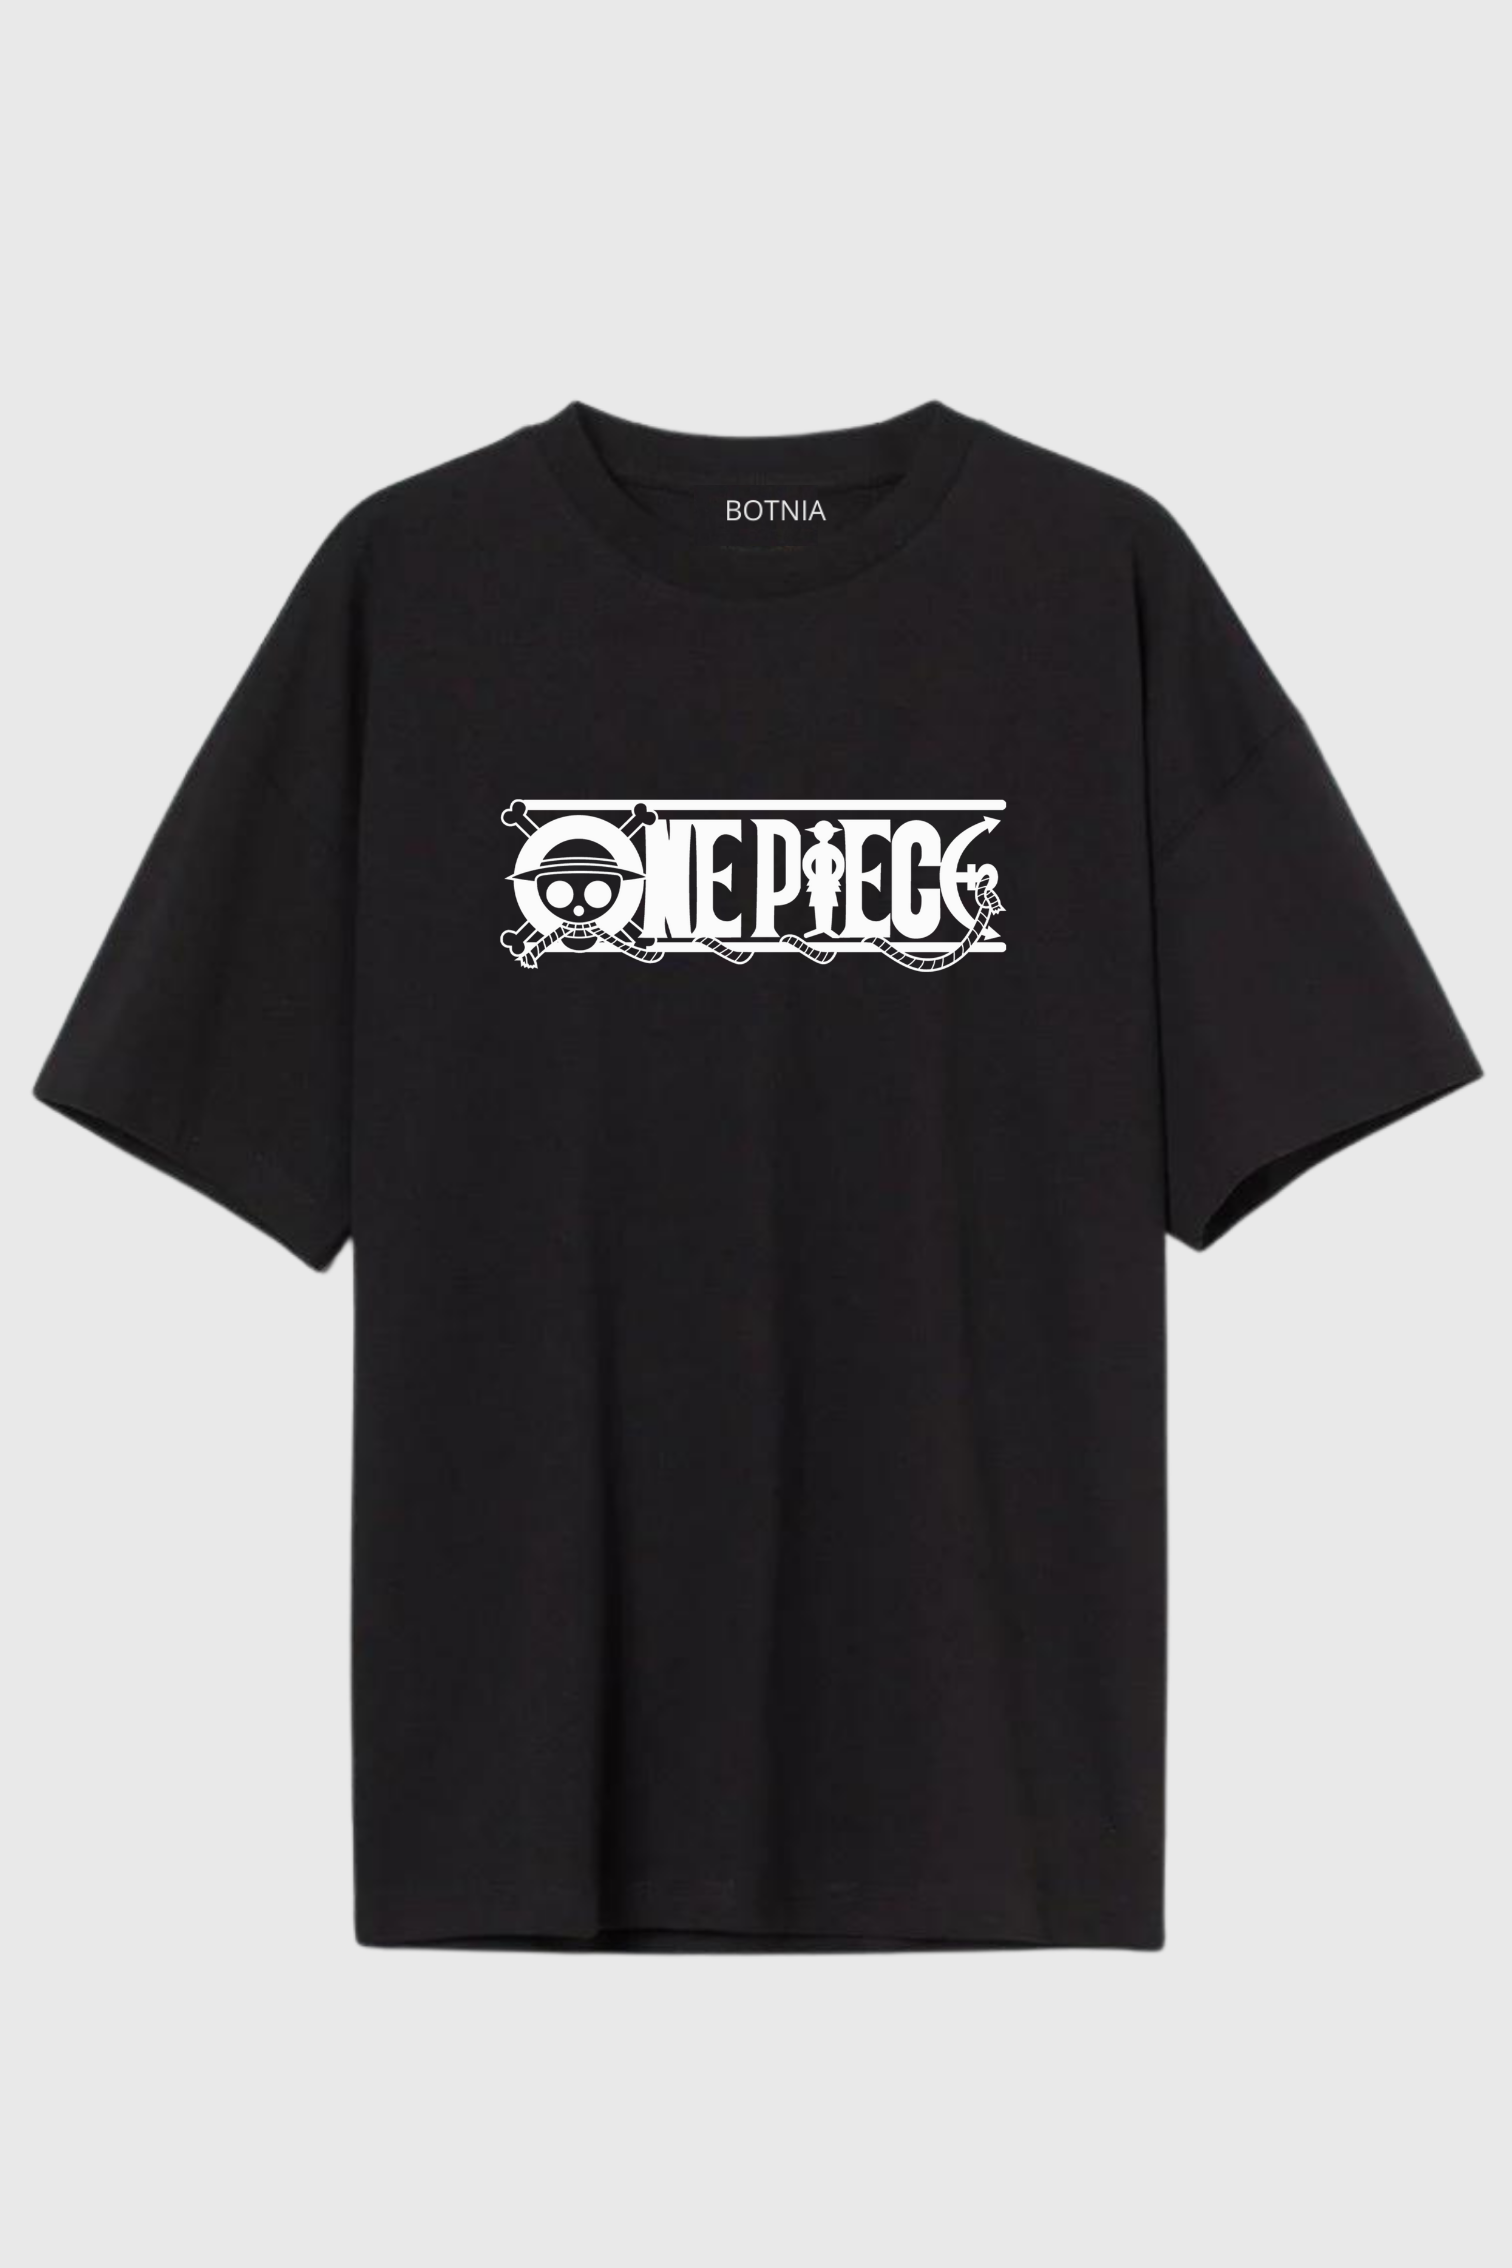 The One Piece - Black - Oversized T-Shirt